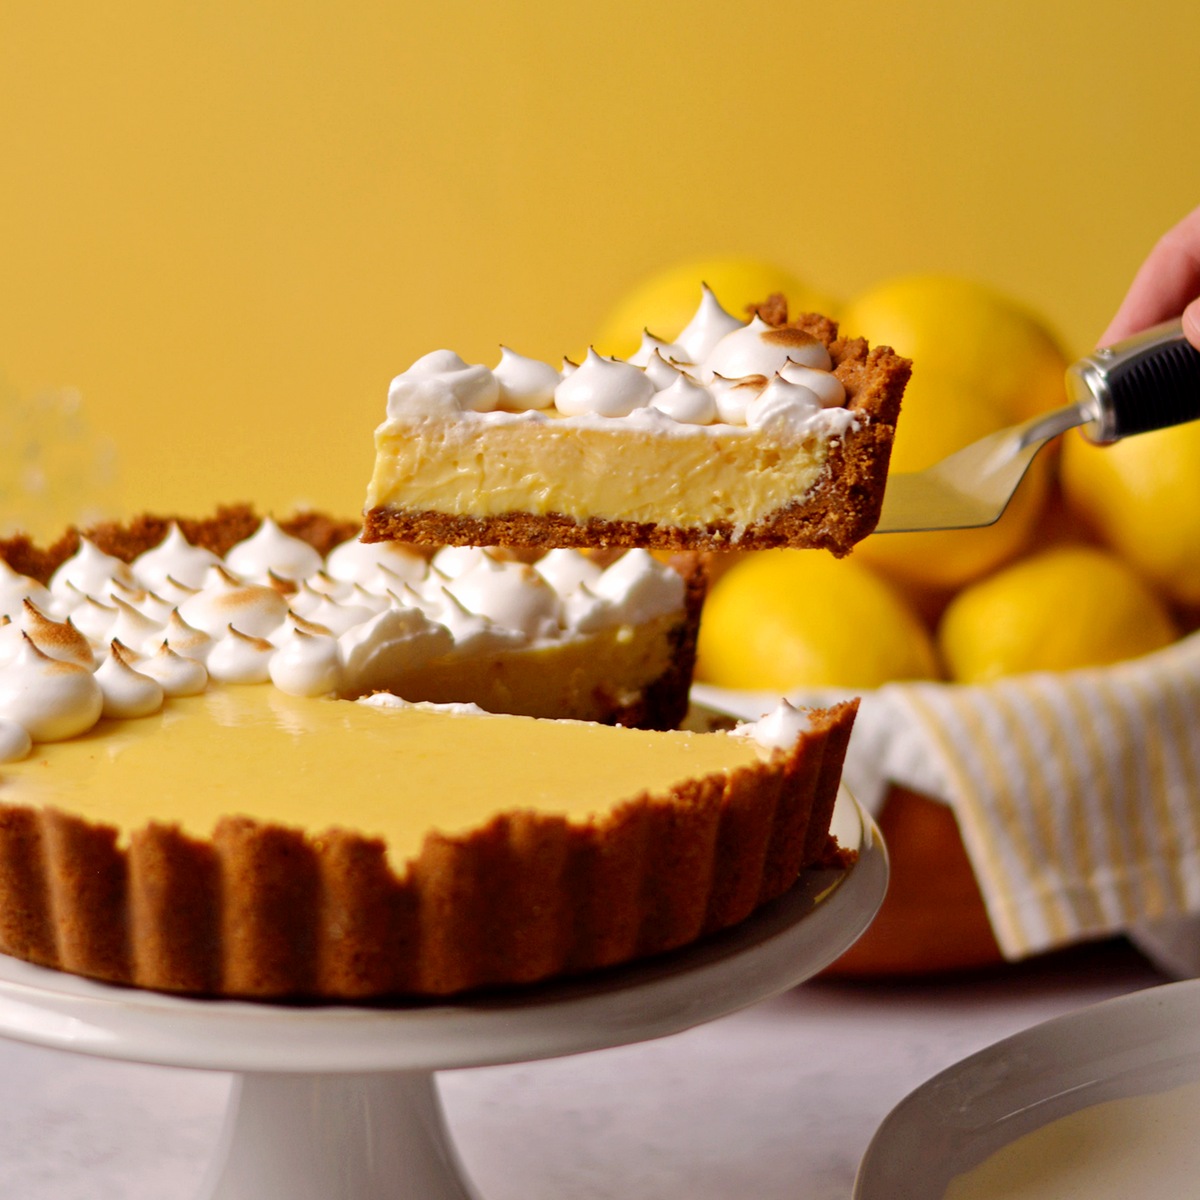 Taking a piece of lemon meringue pie from a pie on a white stand.